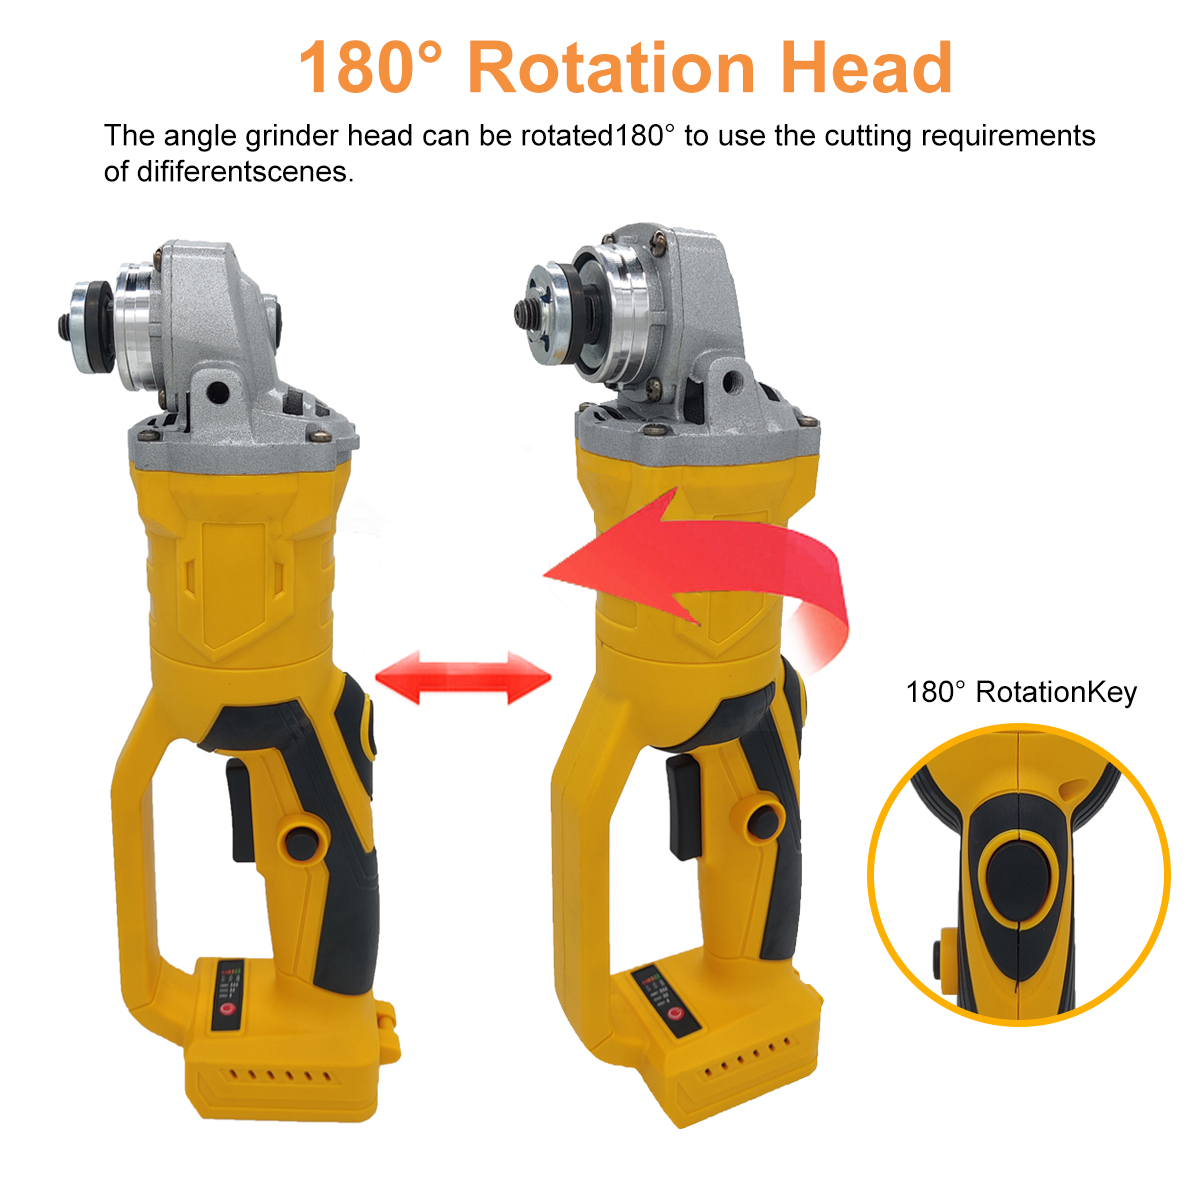 Rotary-Angle-Grinder-180deg-Rotation-Electric-Grinding-Tool-Fit-DAYI-Battery-1890602-3